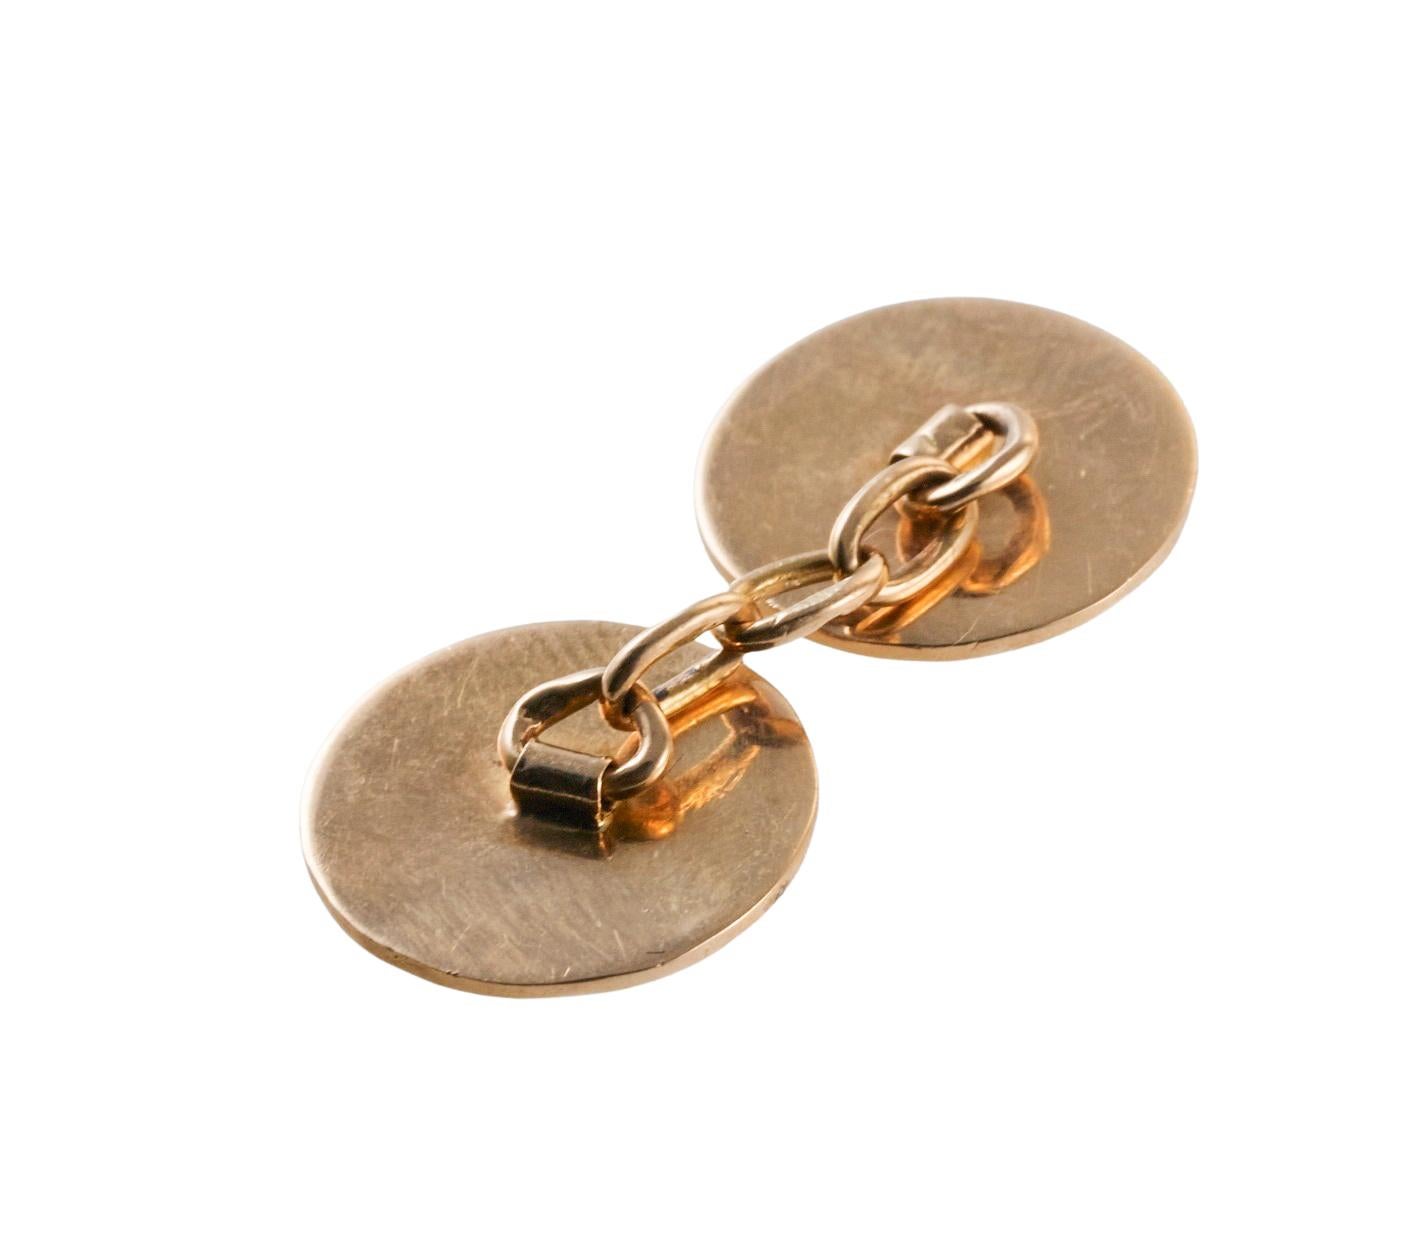 Midcentury Black & White Enamel Gold Cufflinks In Excellent Condition For Sale In New York, NY